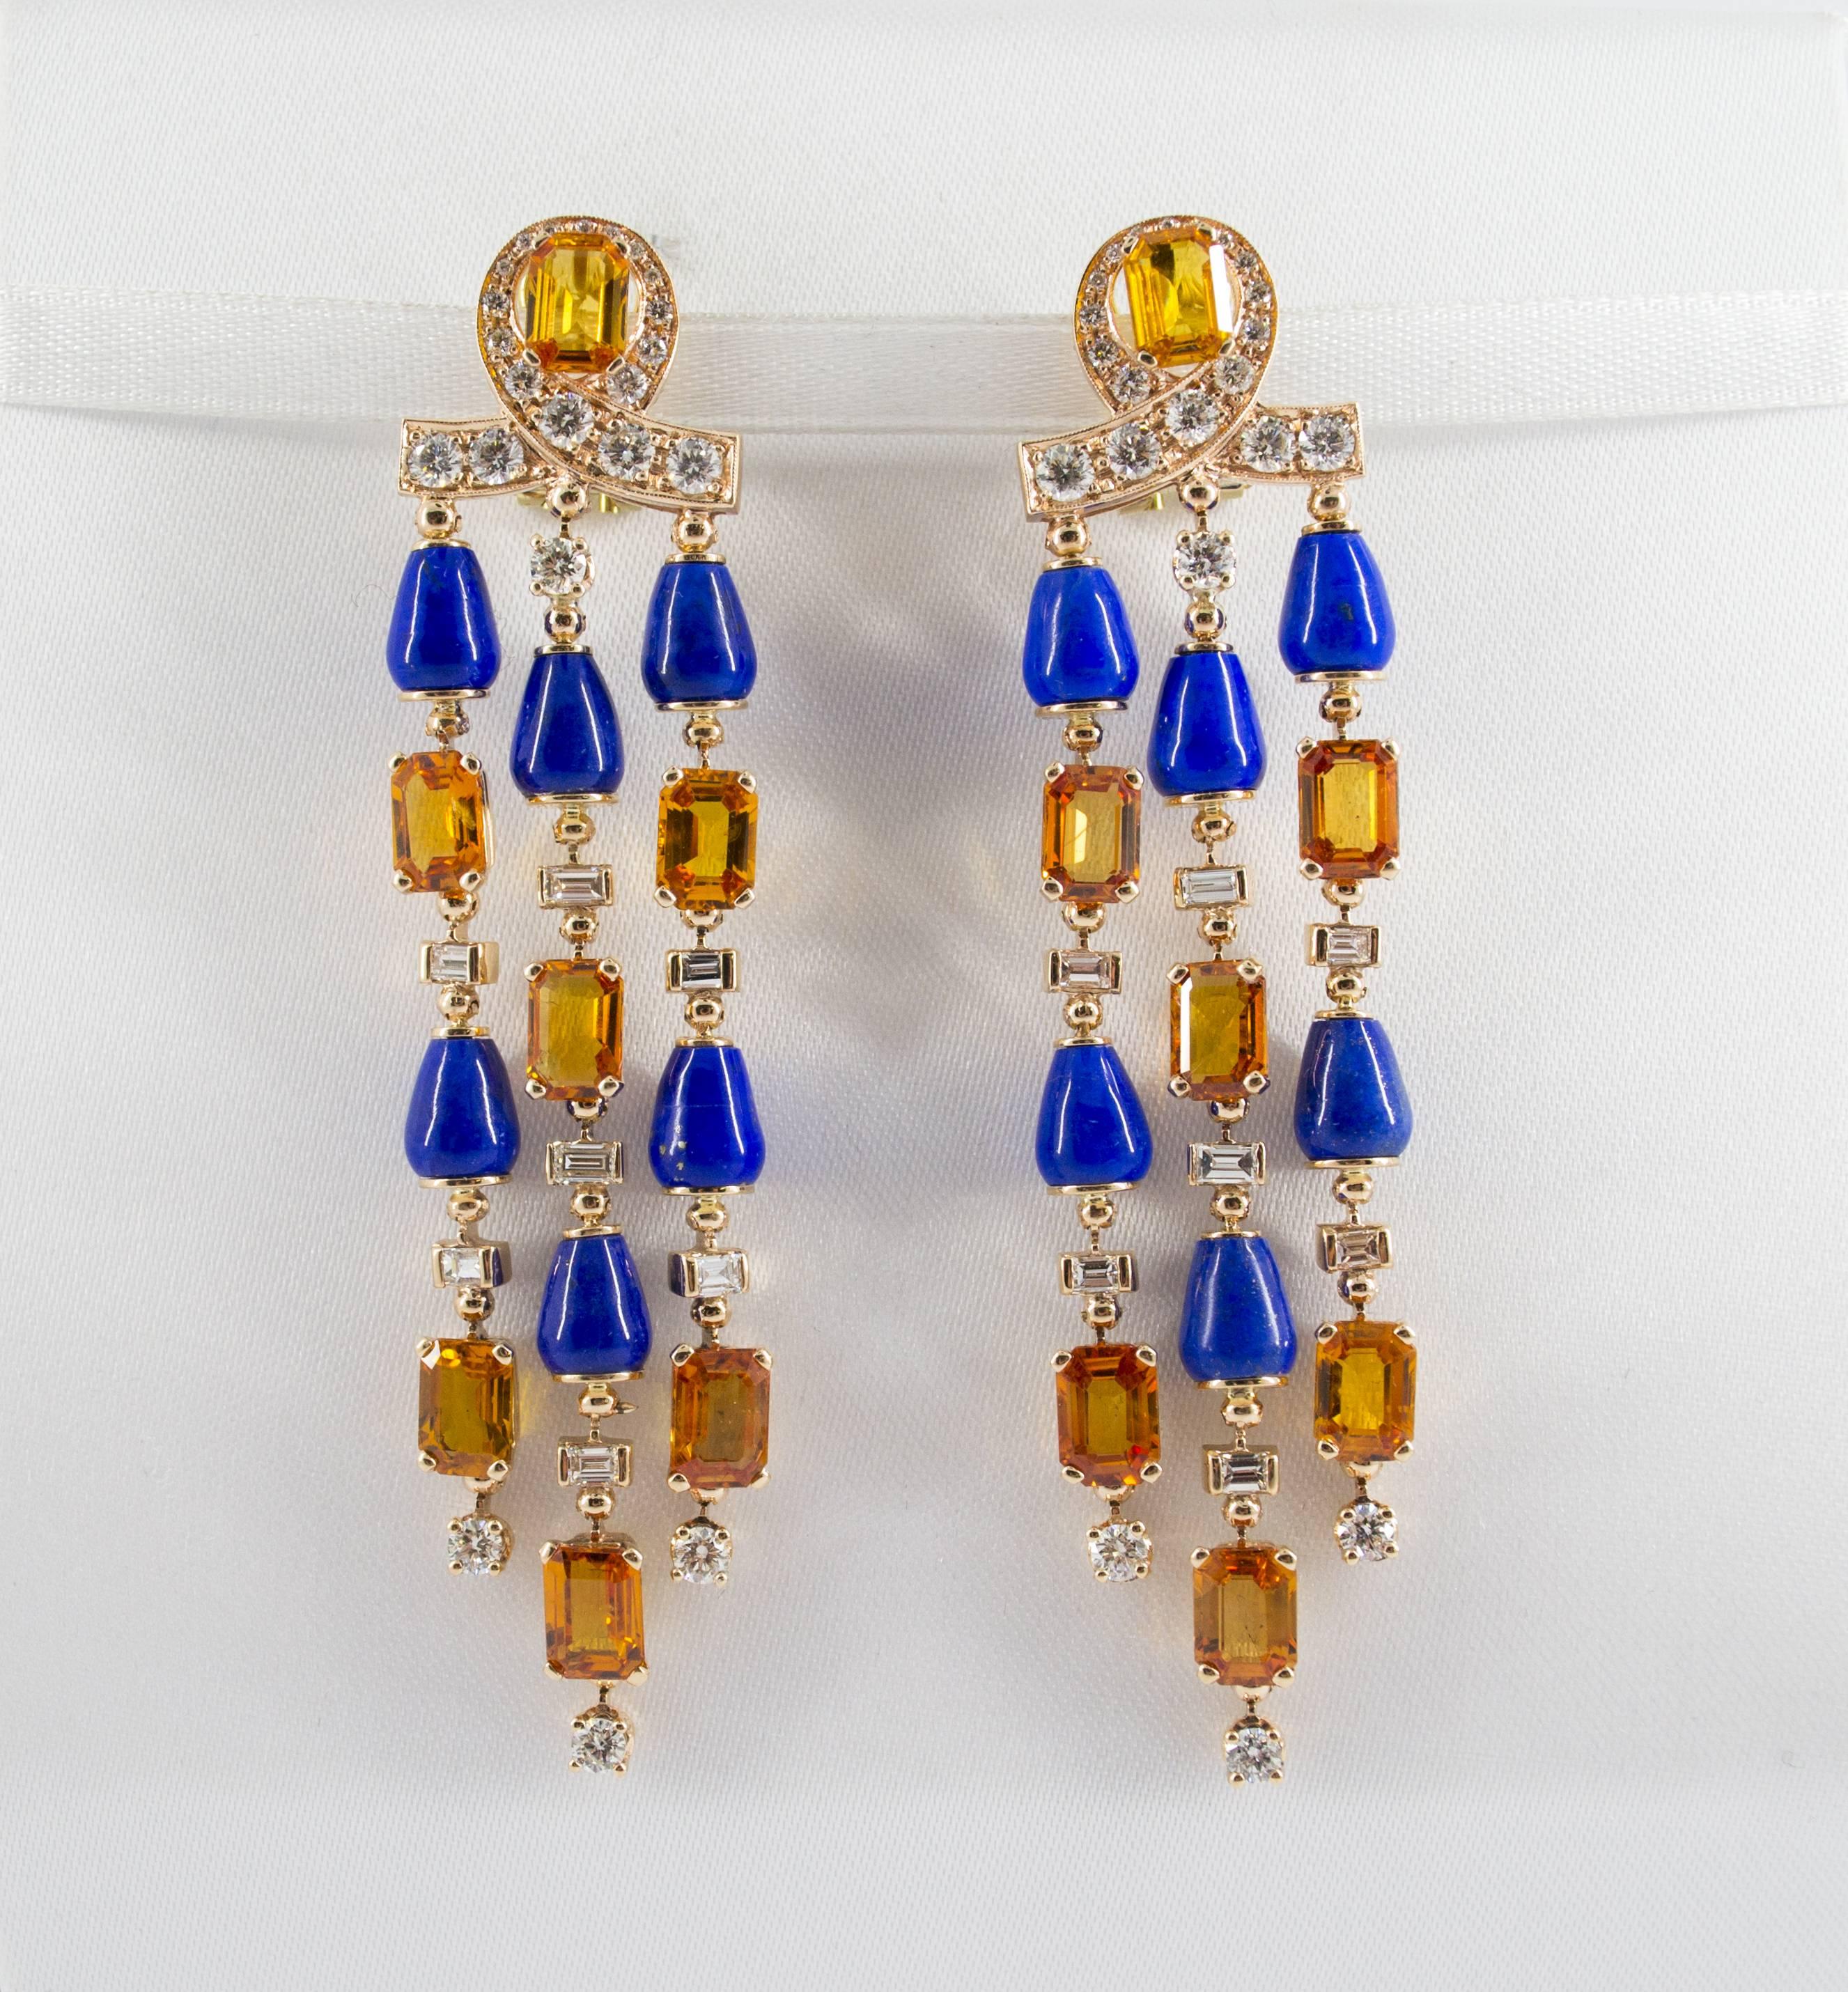 These Earrings are made of 14K Yellow Gold.
These Earrings have 2.90 Carats of White Diamonds.
These Earrings have 14.00 Carats of Yellow Sapphires.
These Earrings have also Lapis Lazuli.
All our Earrings have pins for pierced ears but we can change